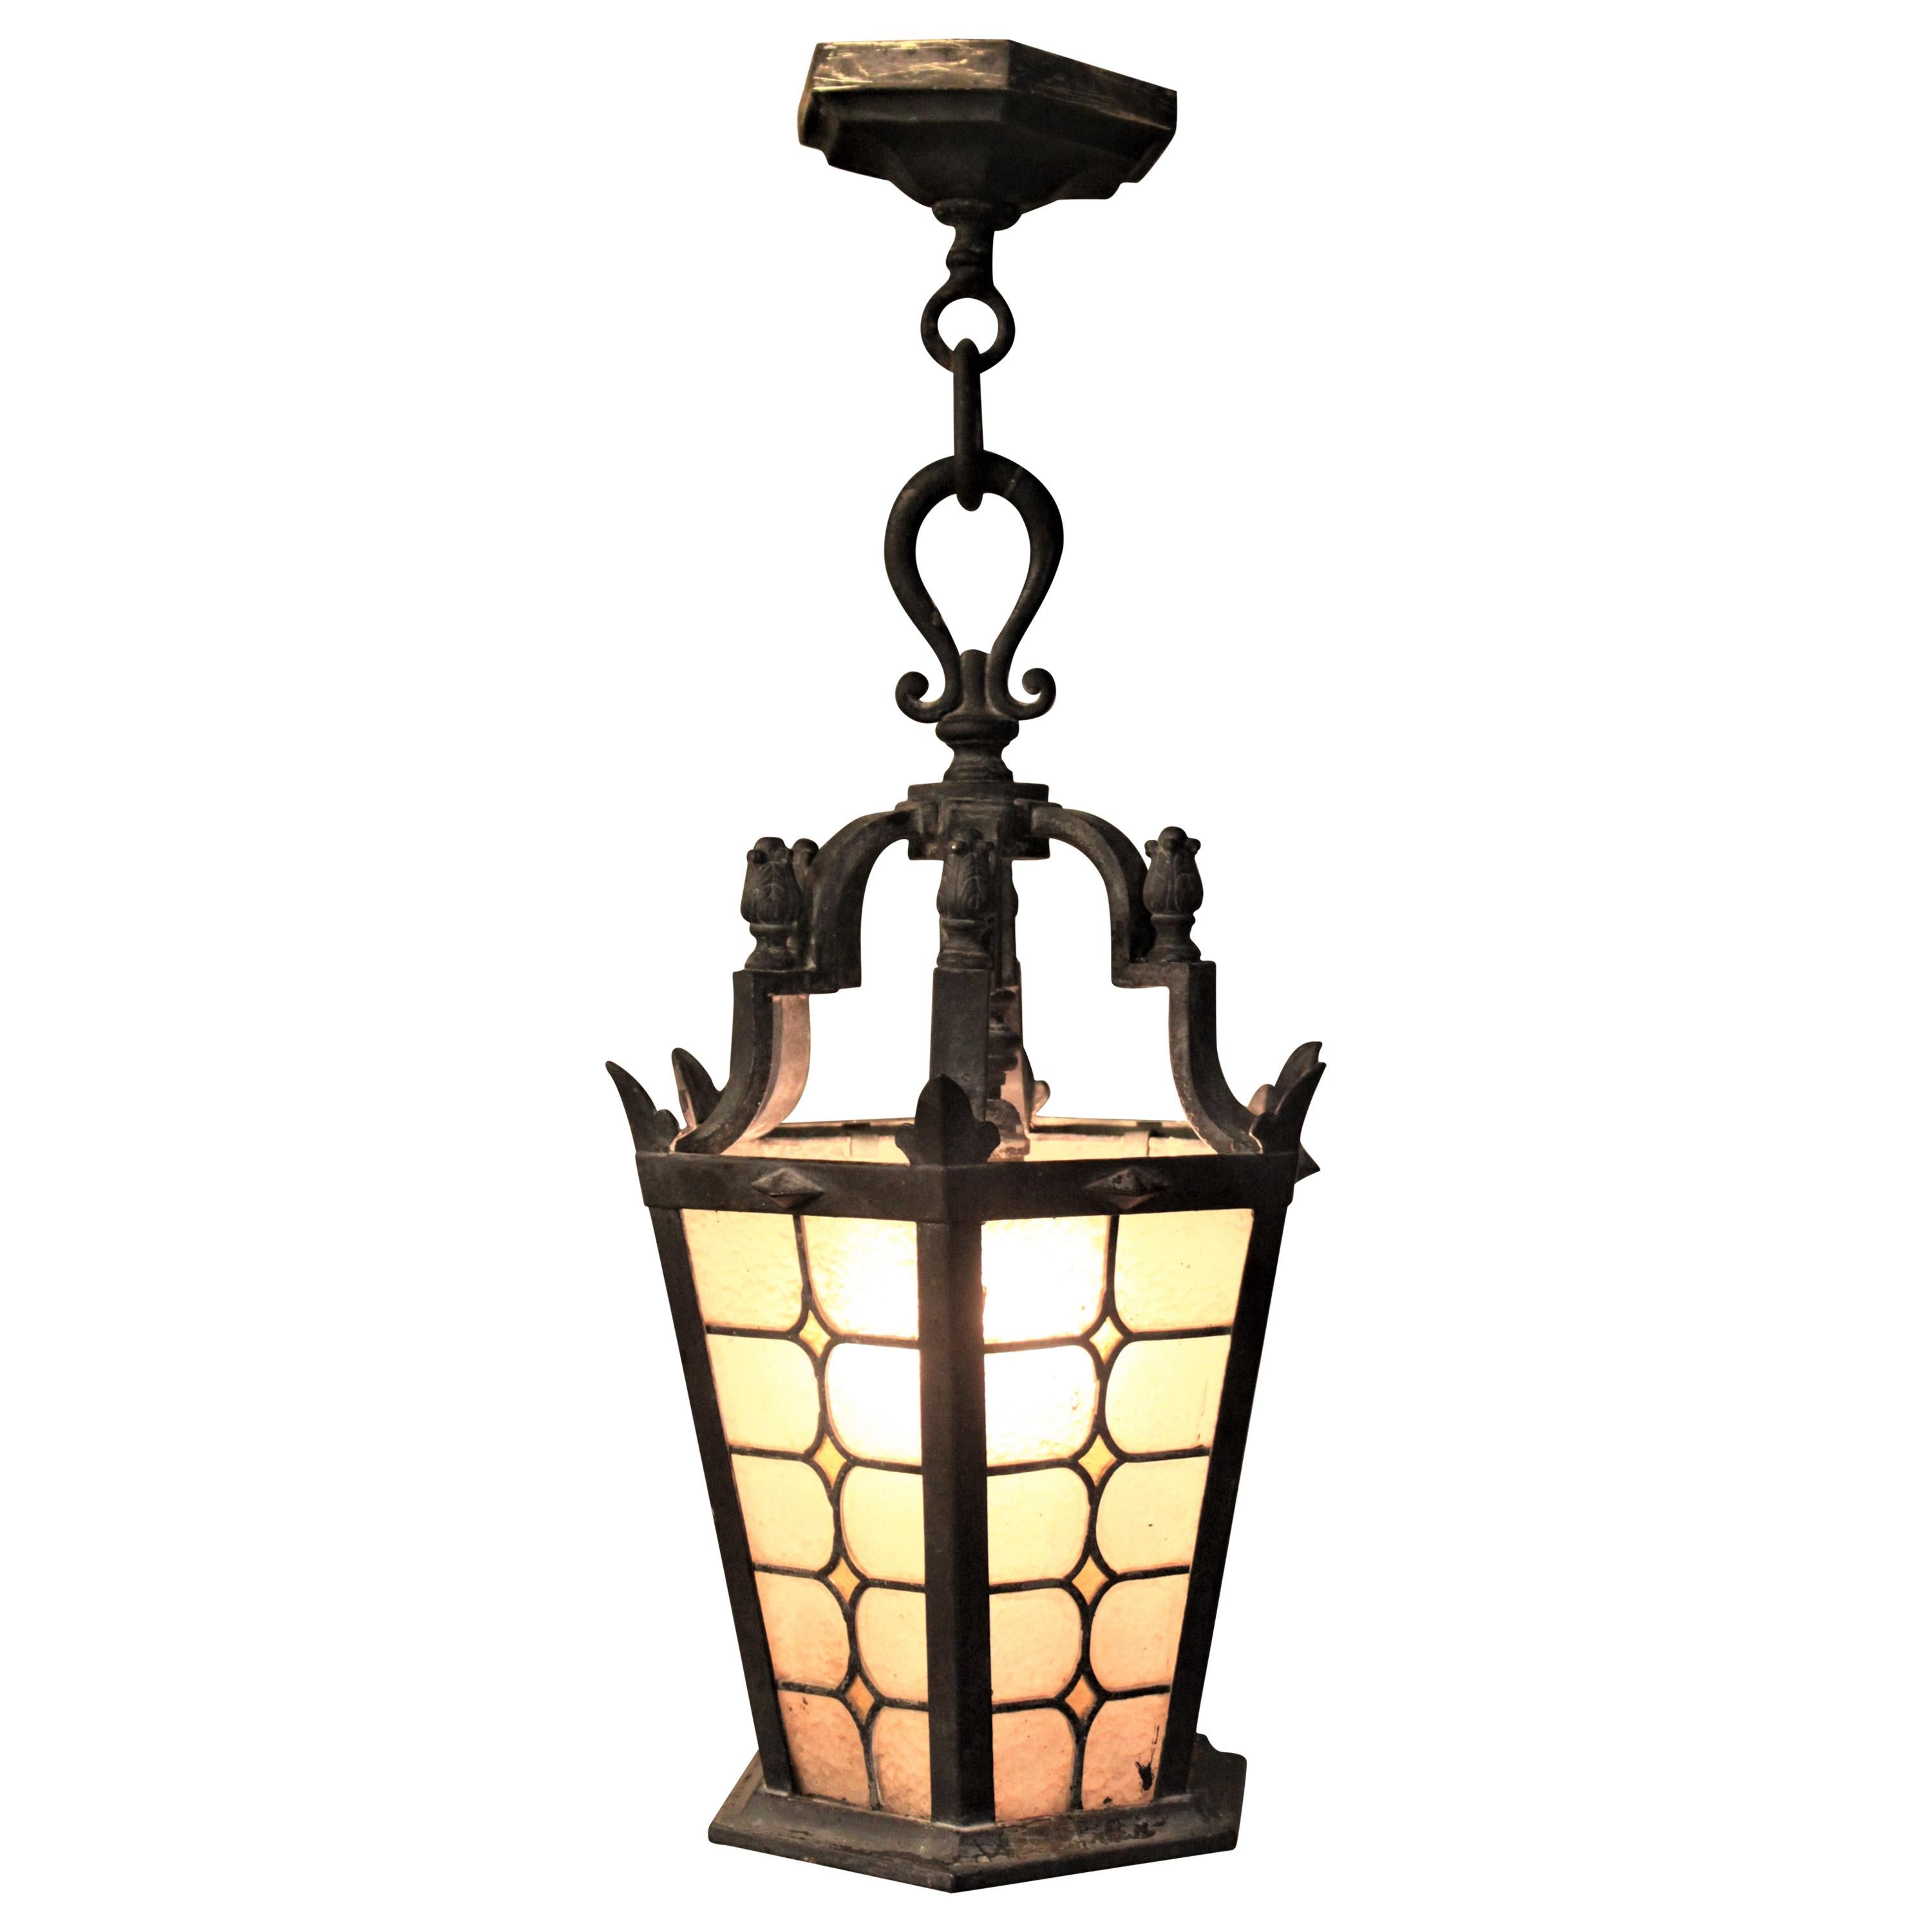 Antique Cast Bronze Outdoor Pendant Light Fixture with Stained Glass Panels